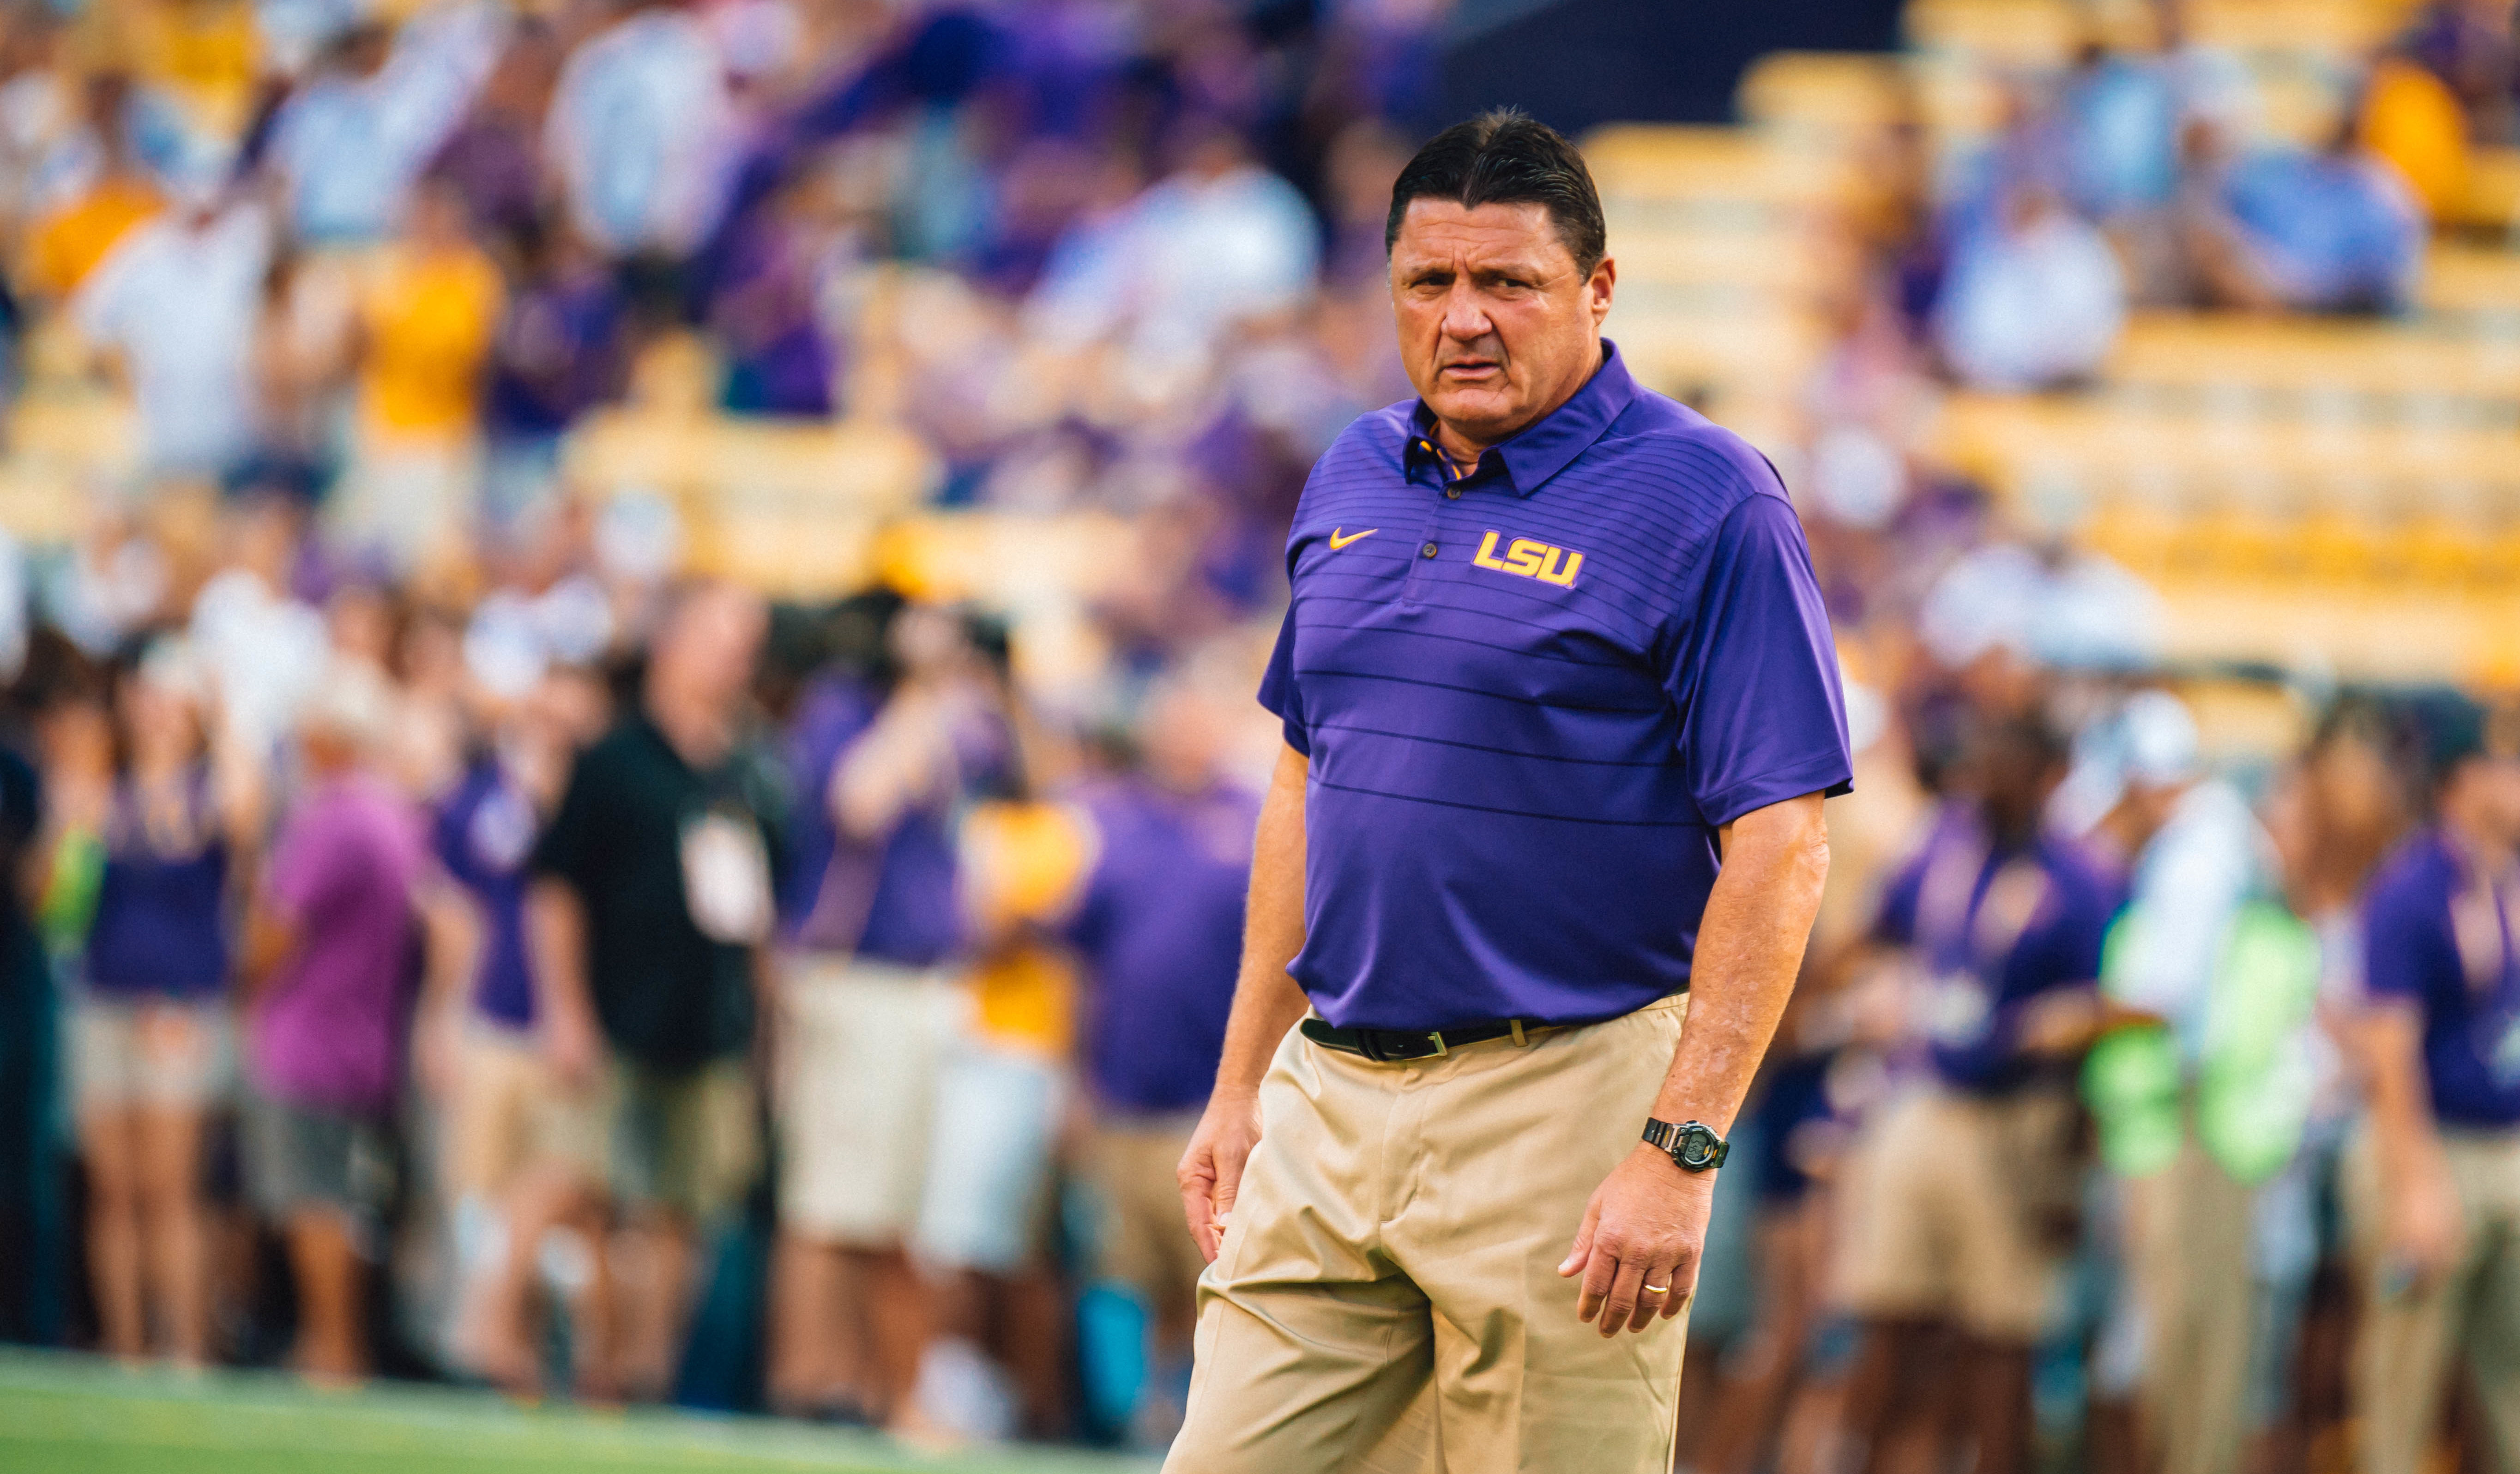 LSU needs to turn its season around—and quickly—if it hopes to make a